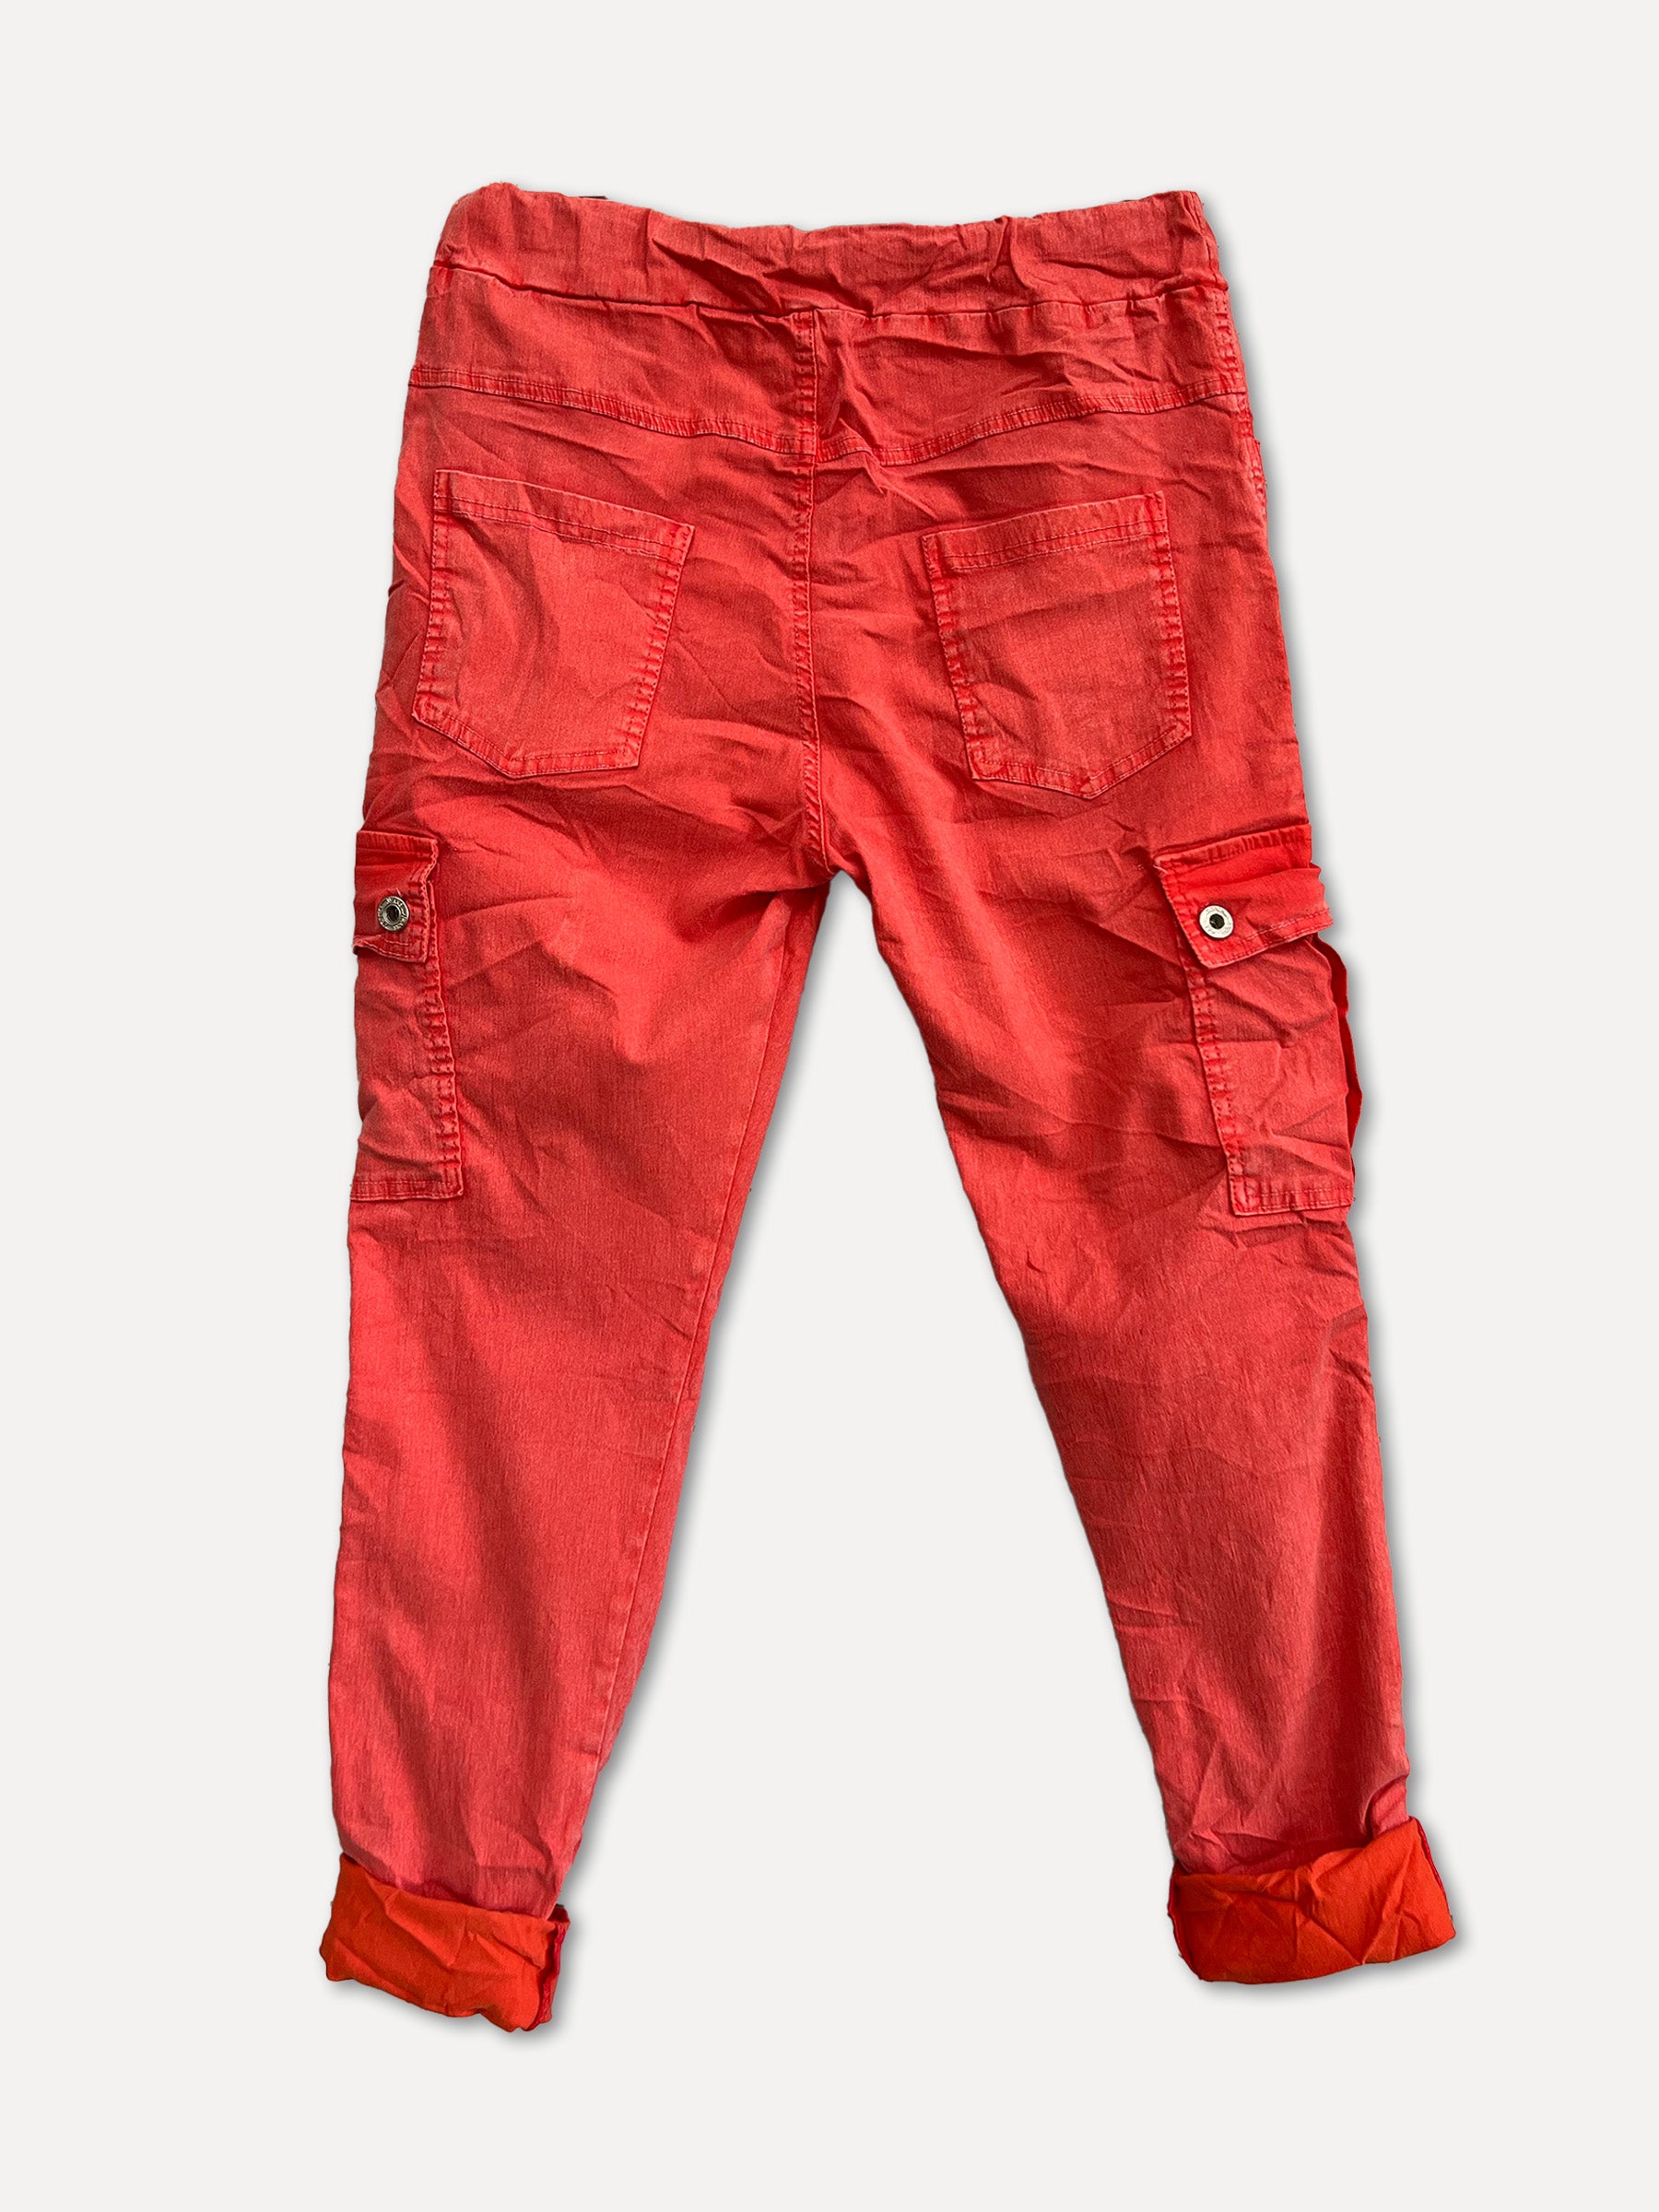 CARGO BOX Pants, Red